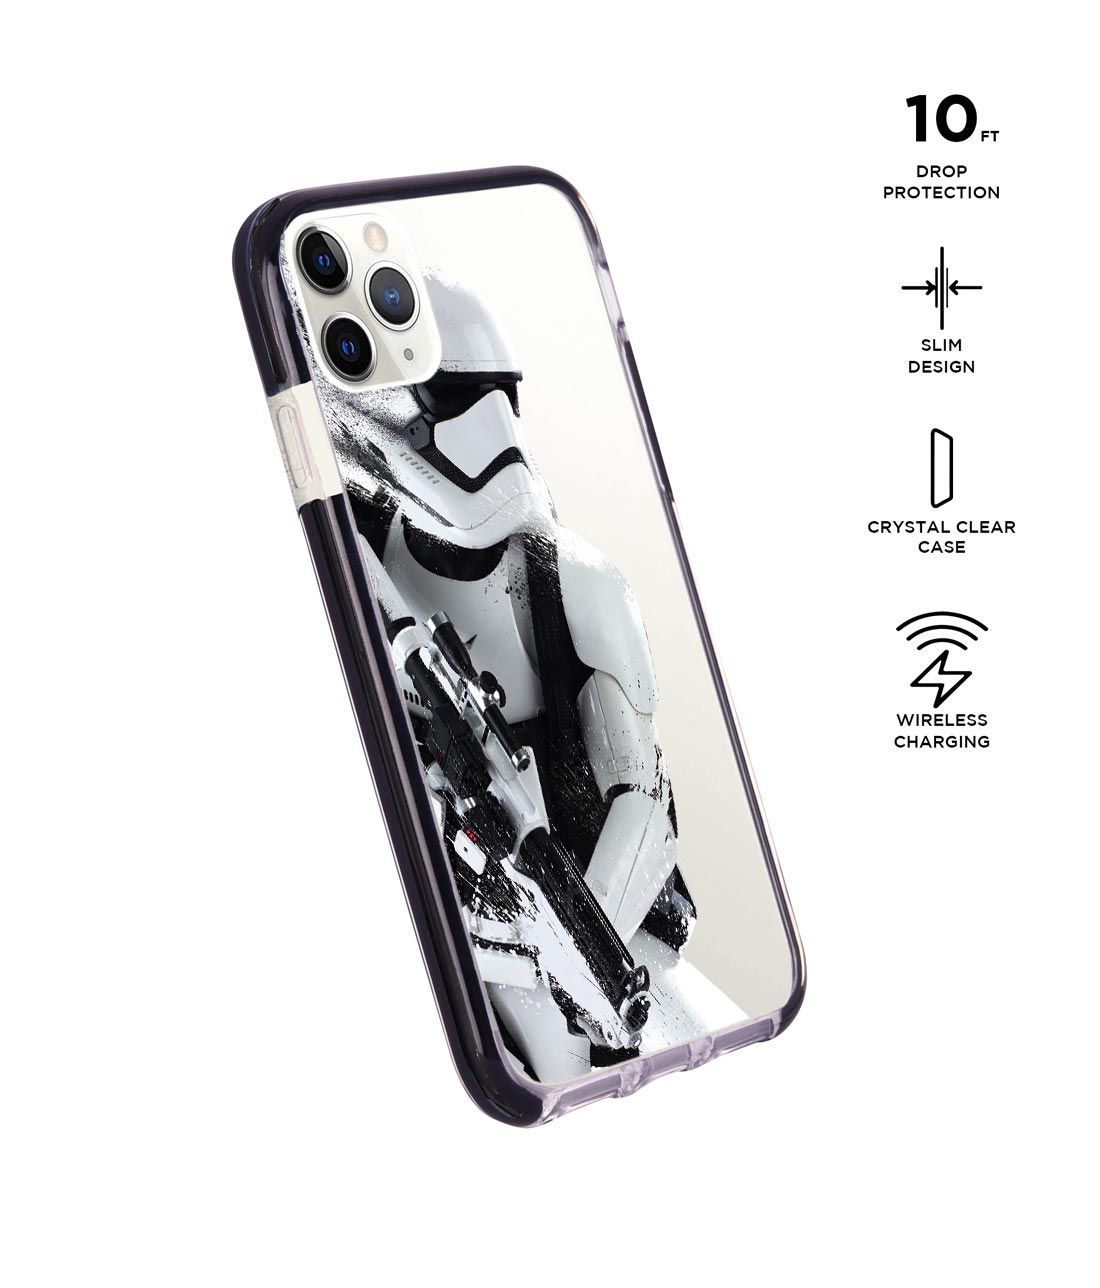 Trooper Storm - Extreme Phone Case for iPhone 11 Pro